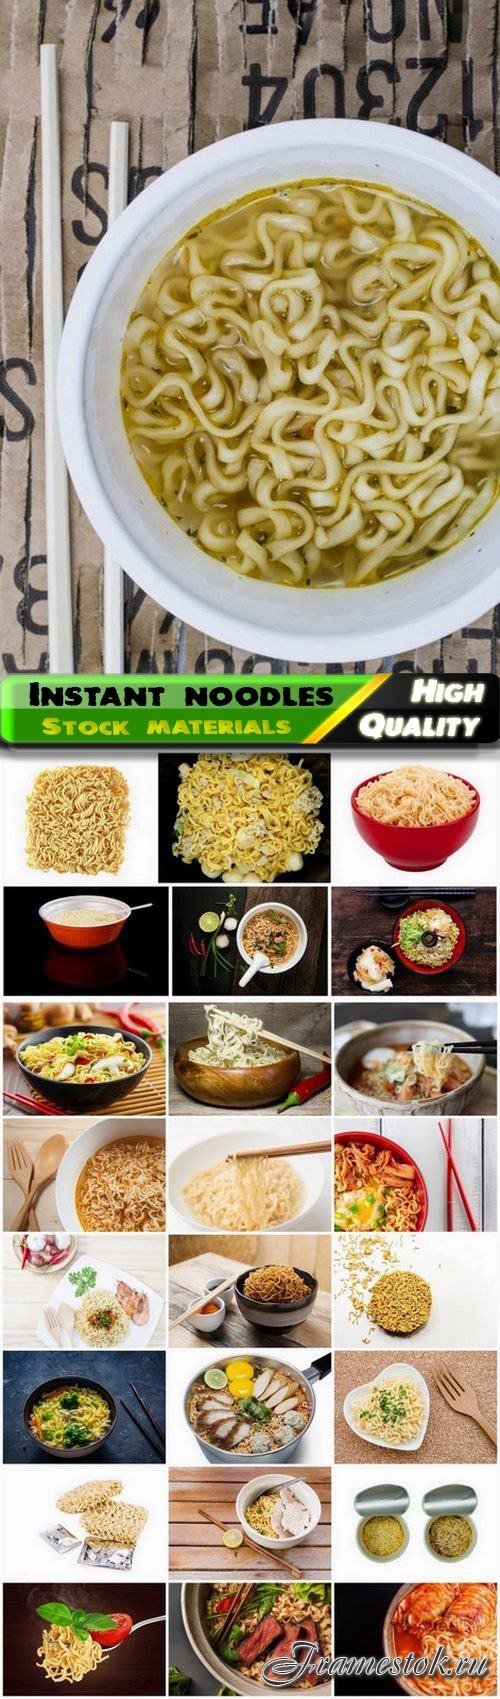 Instant noodles with herbs vegetables and meat - 25 HQ Jpg